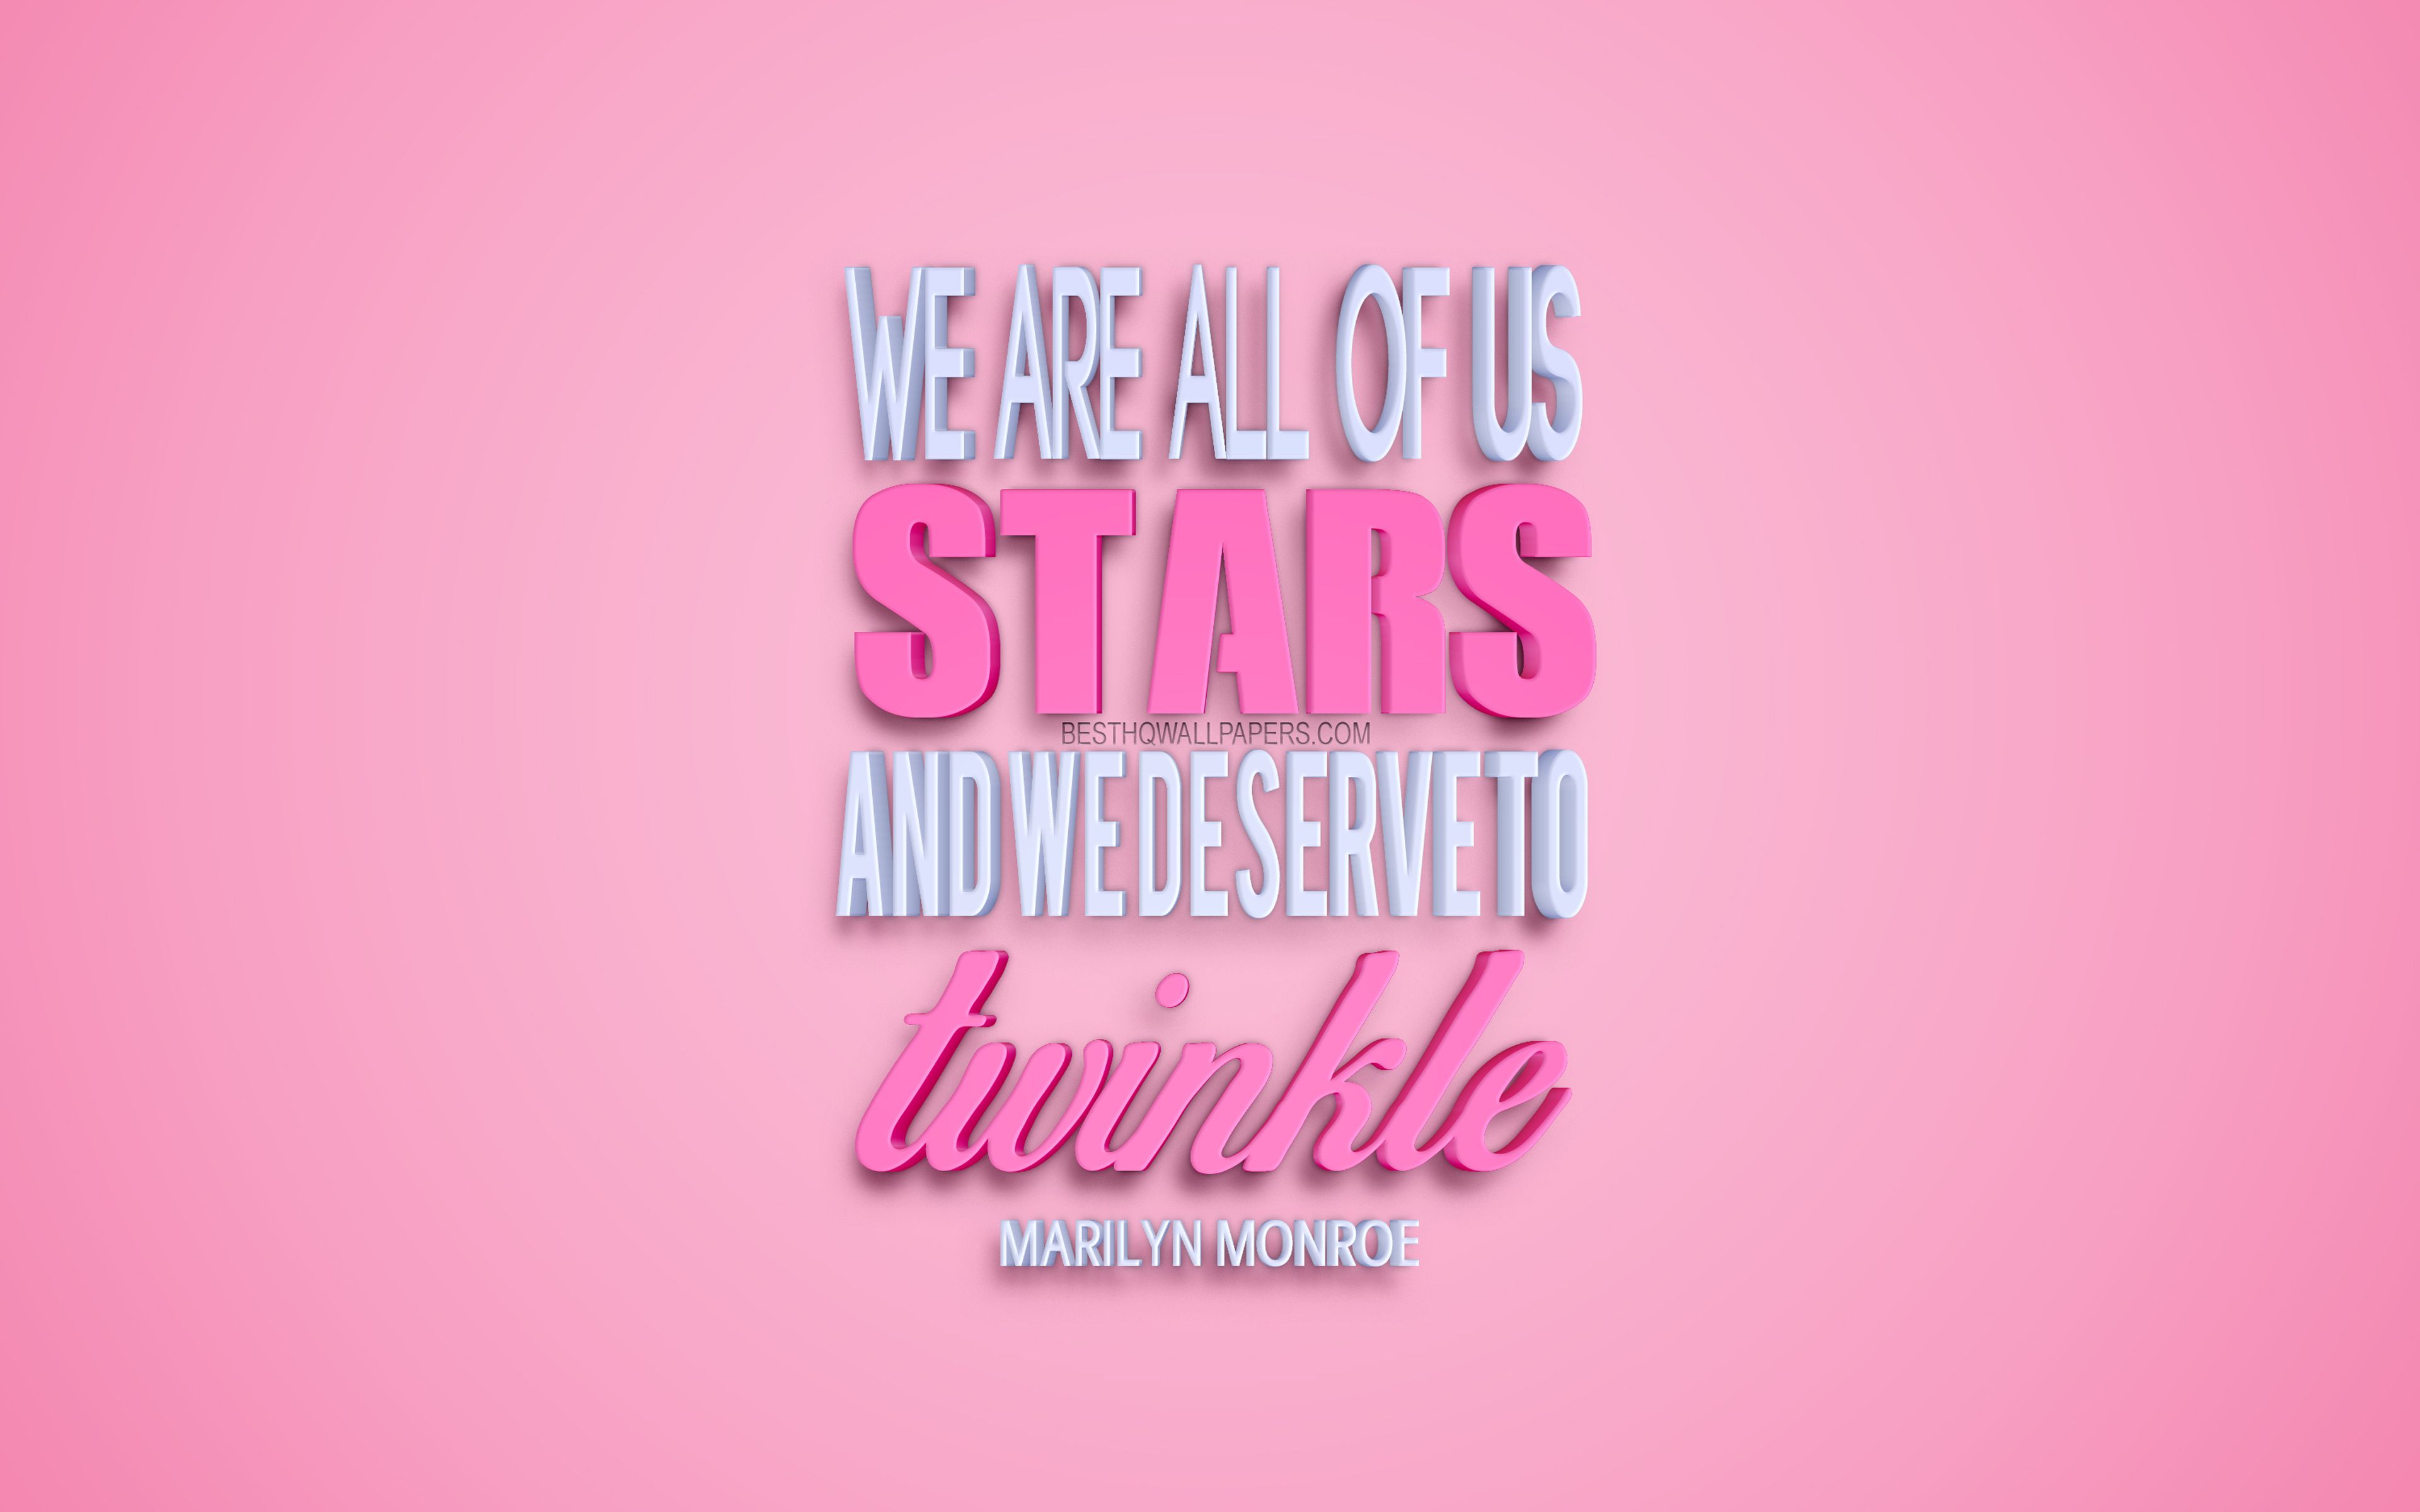 Download wallpaper We are all of us stars and we deserve to